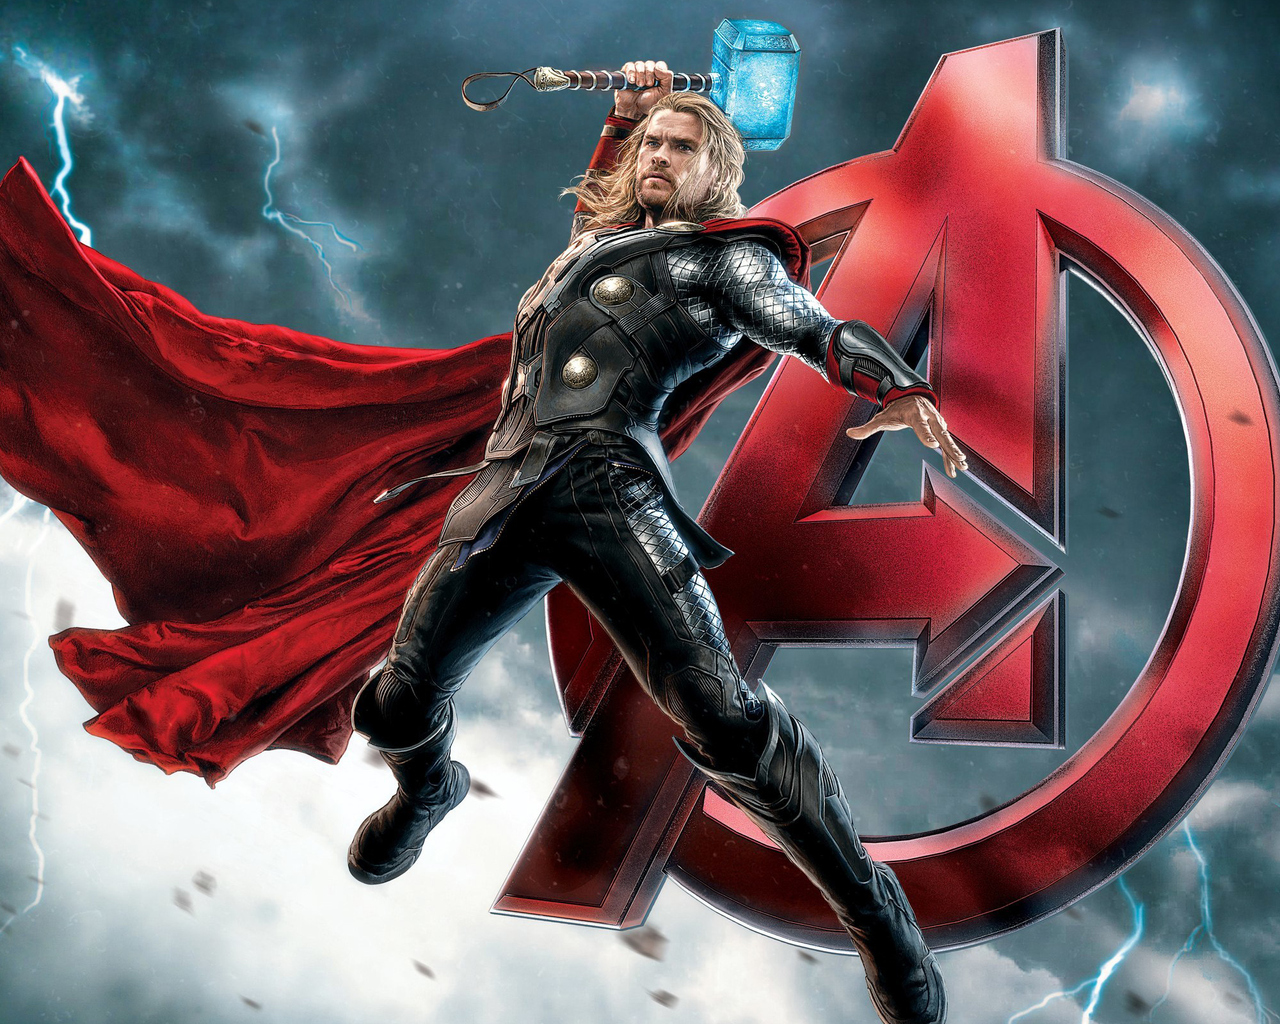 Download Thor Avengers, Thor, Avengers Wallpaper in 1280x1024 ...